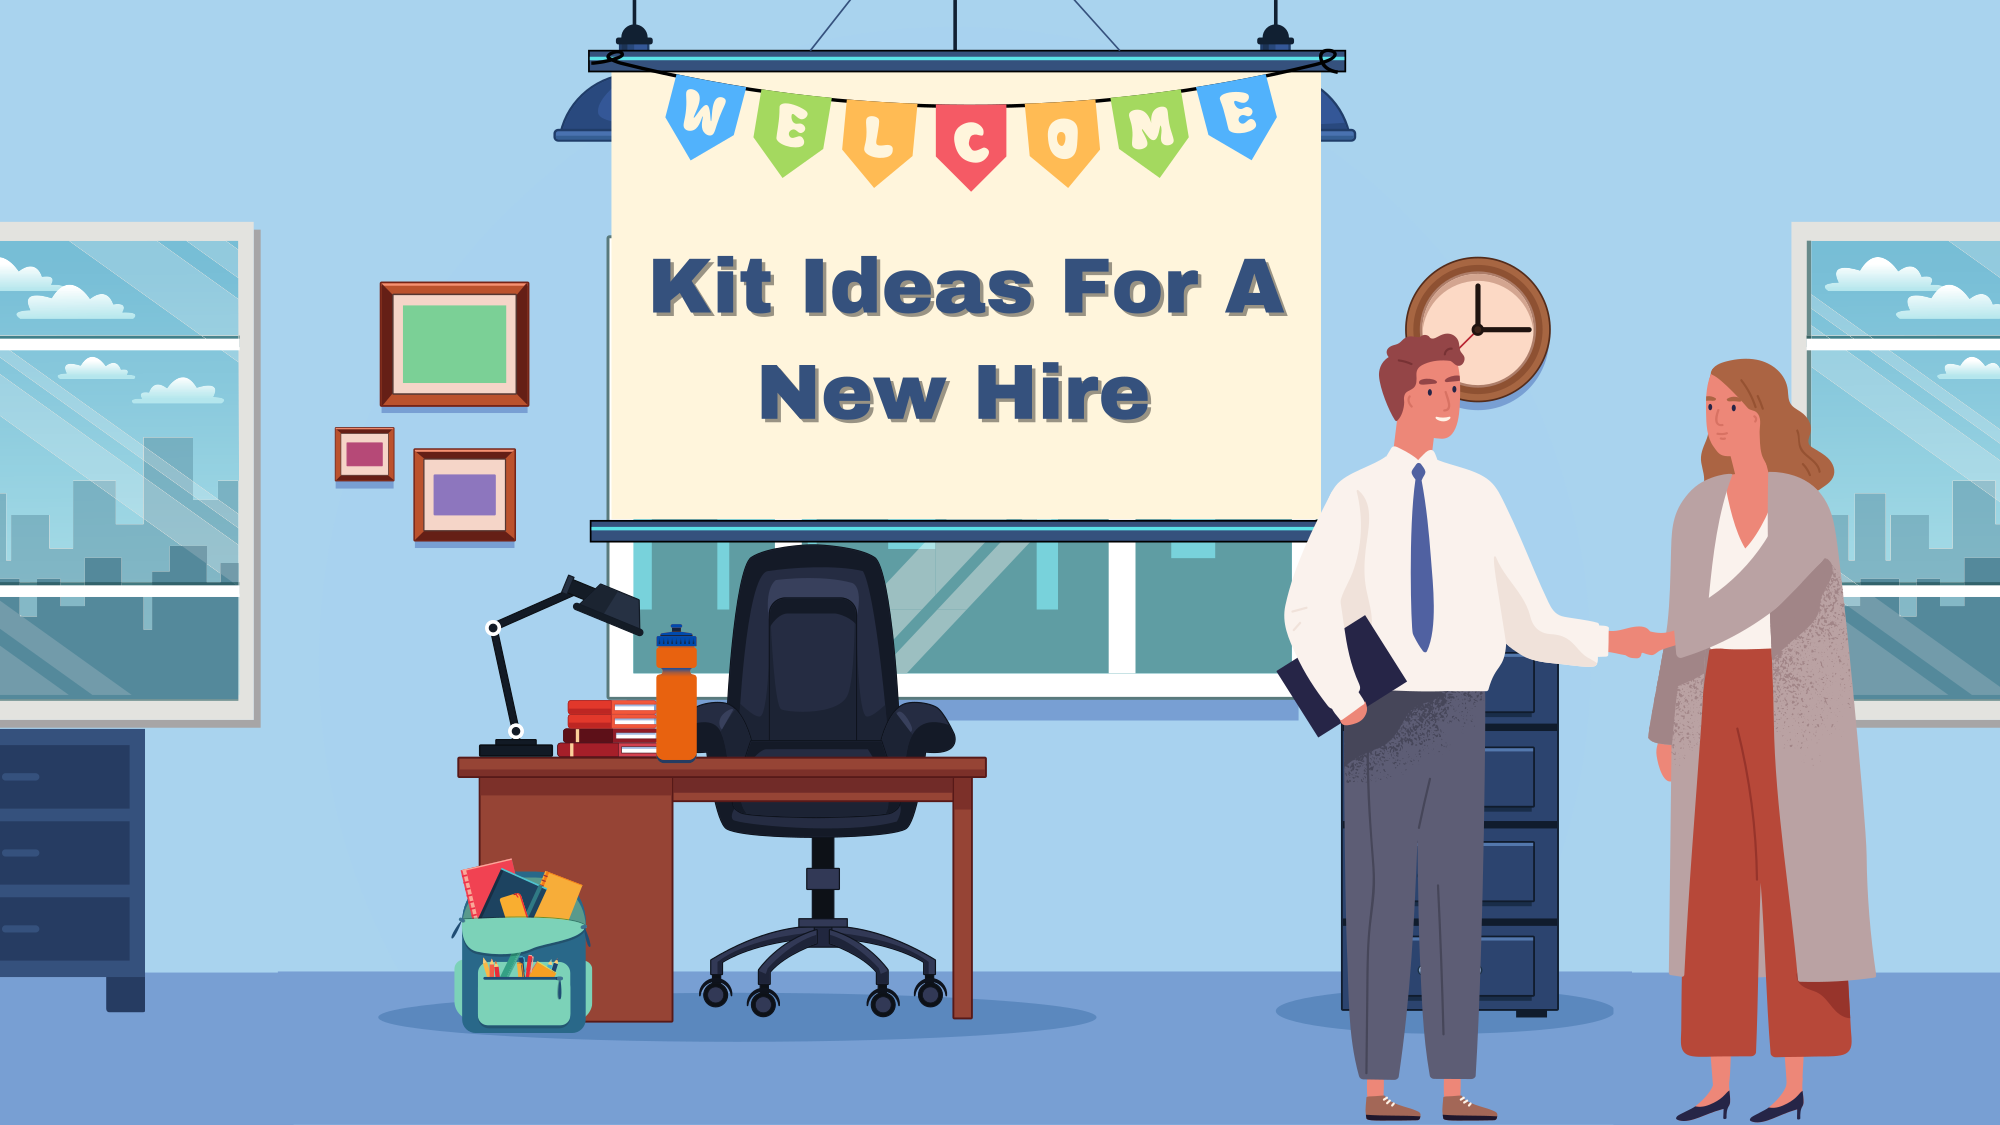 Promotional Kit ideas for new employees